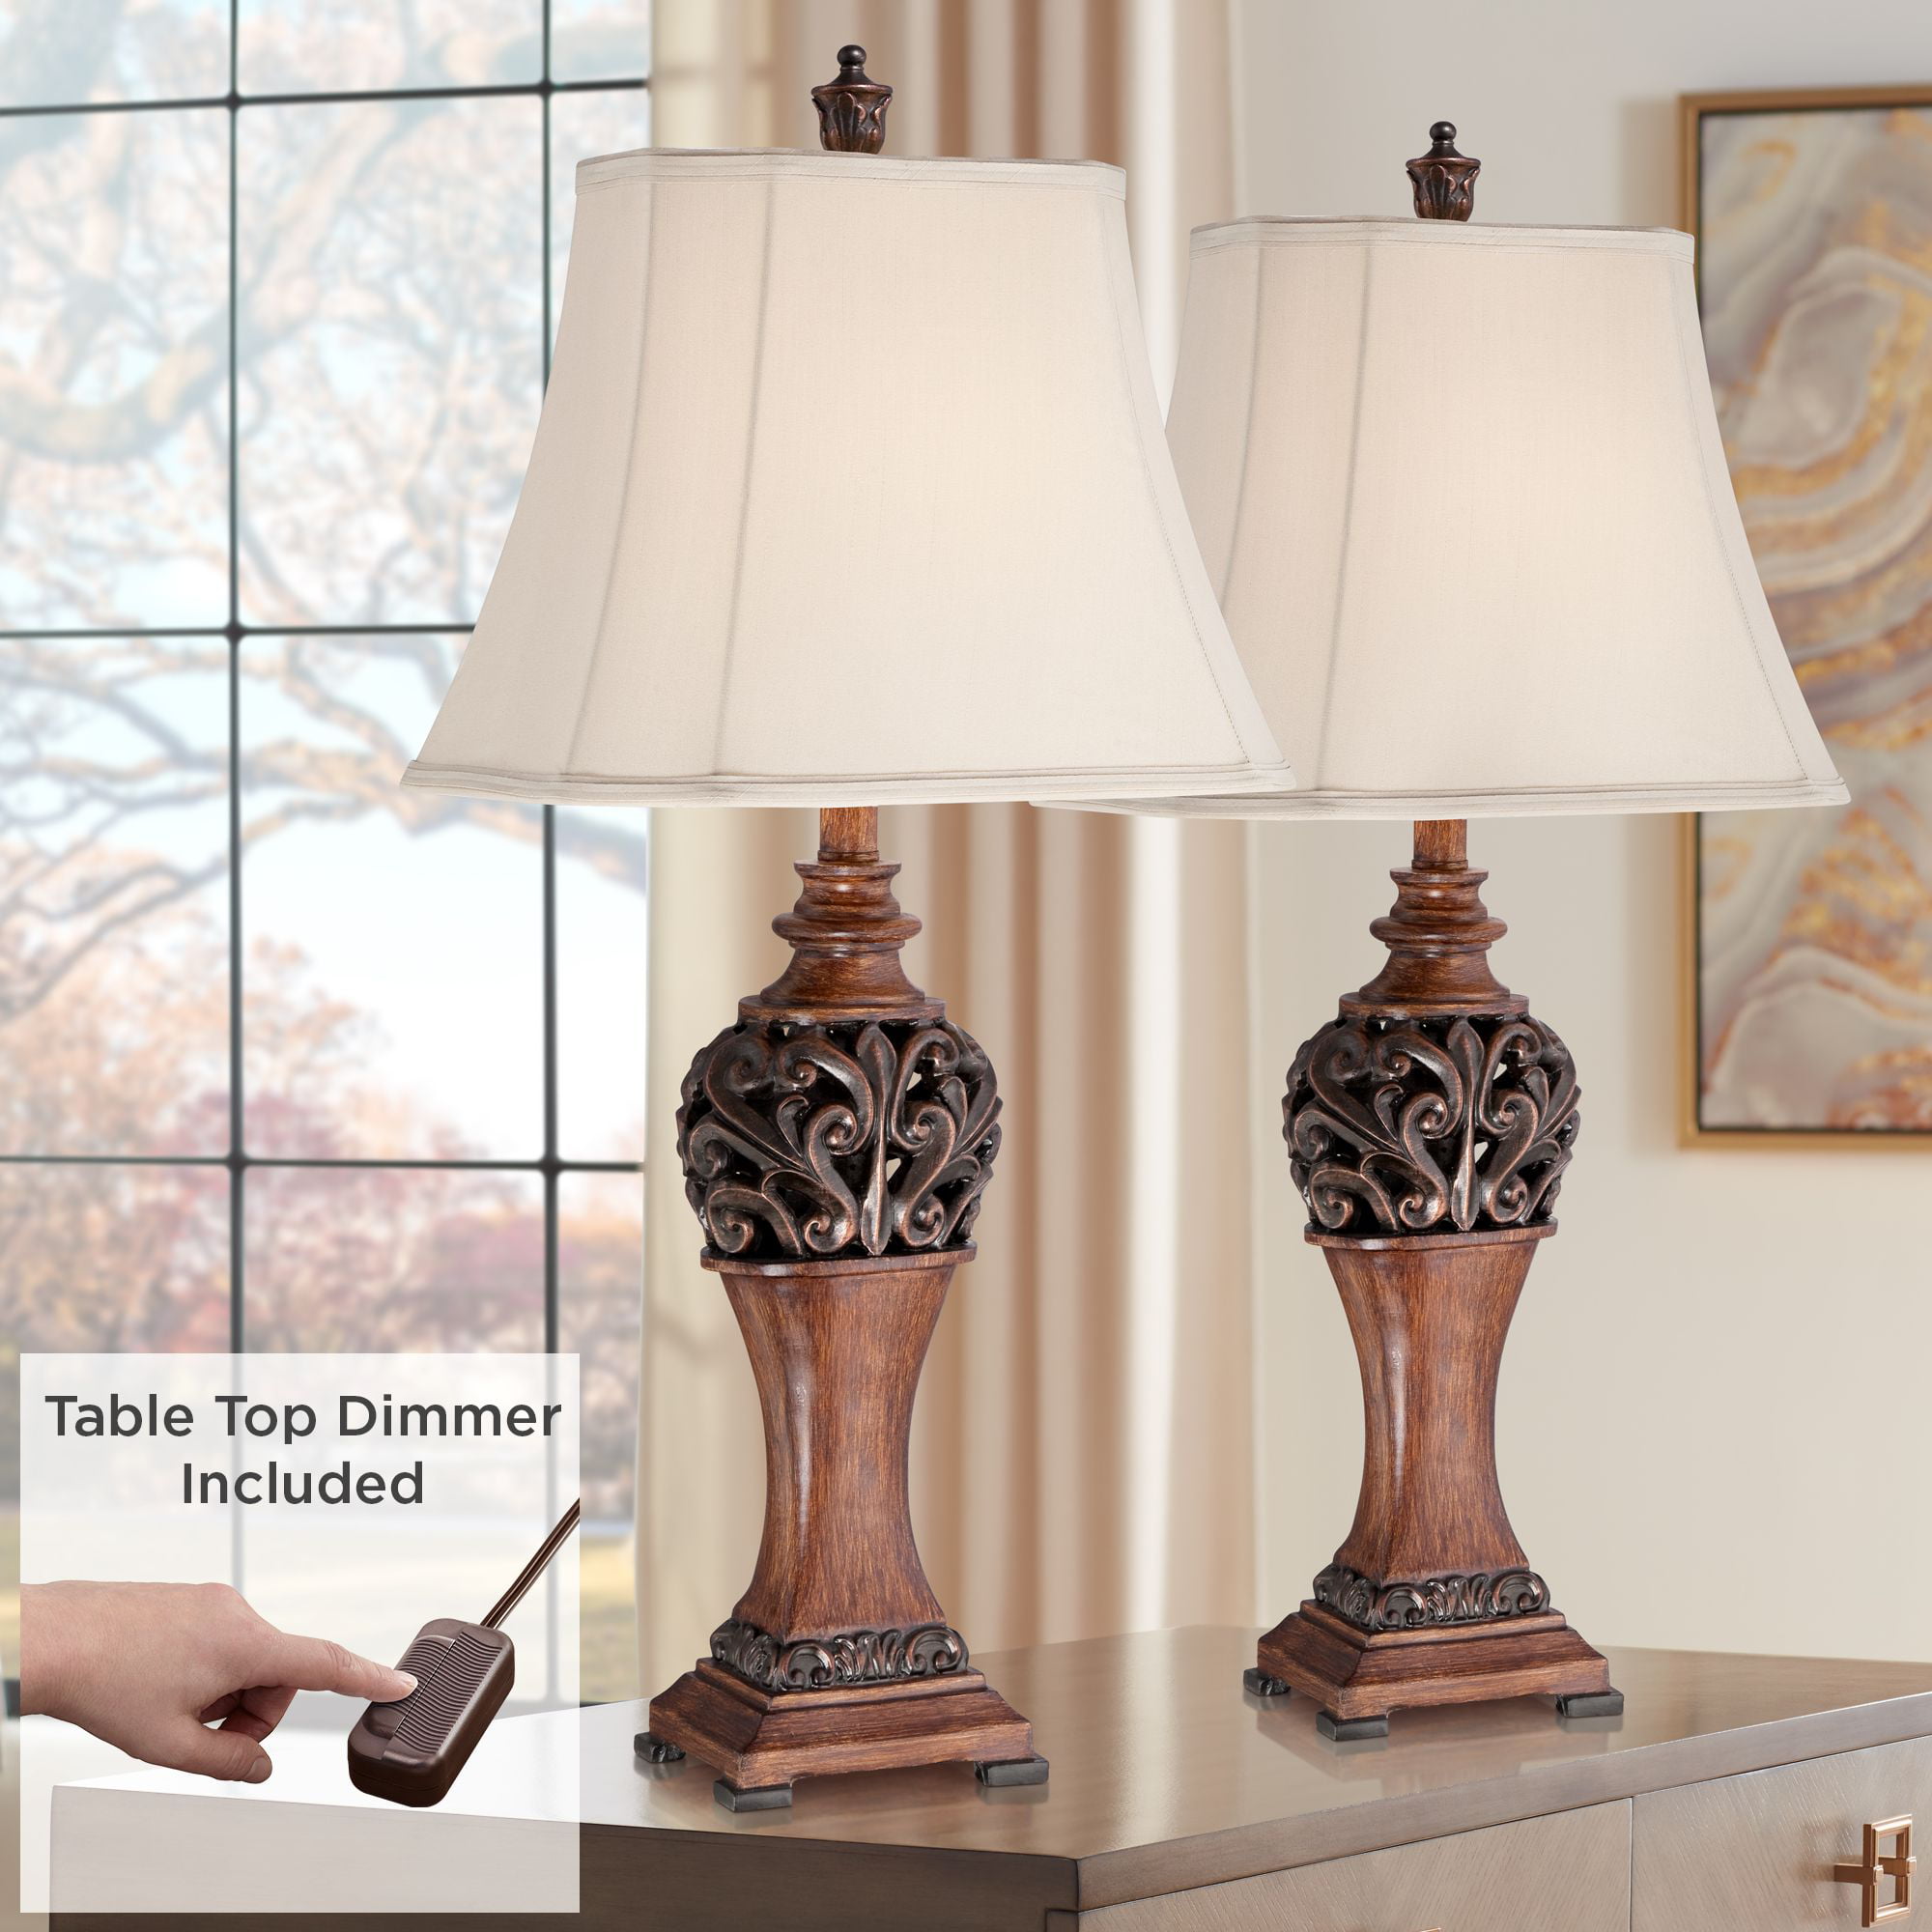 Regency Hill Traditional Table Lamps, Lamps Table Top